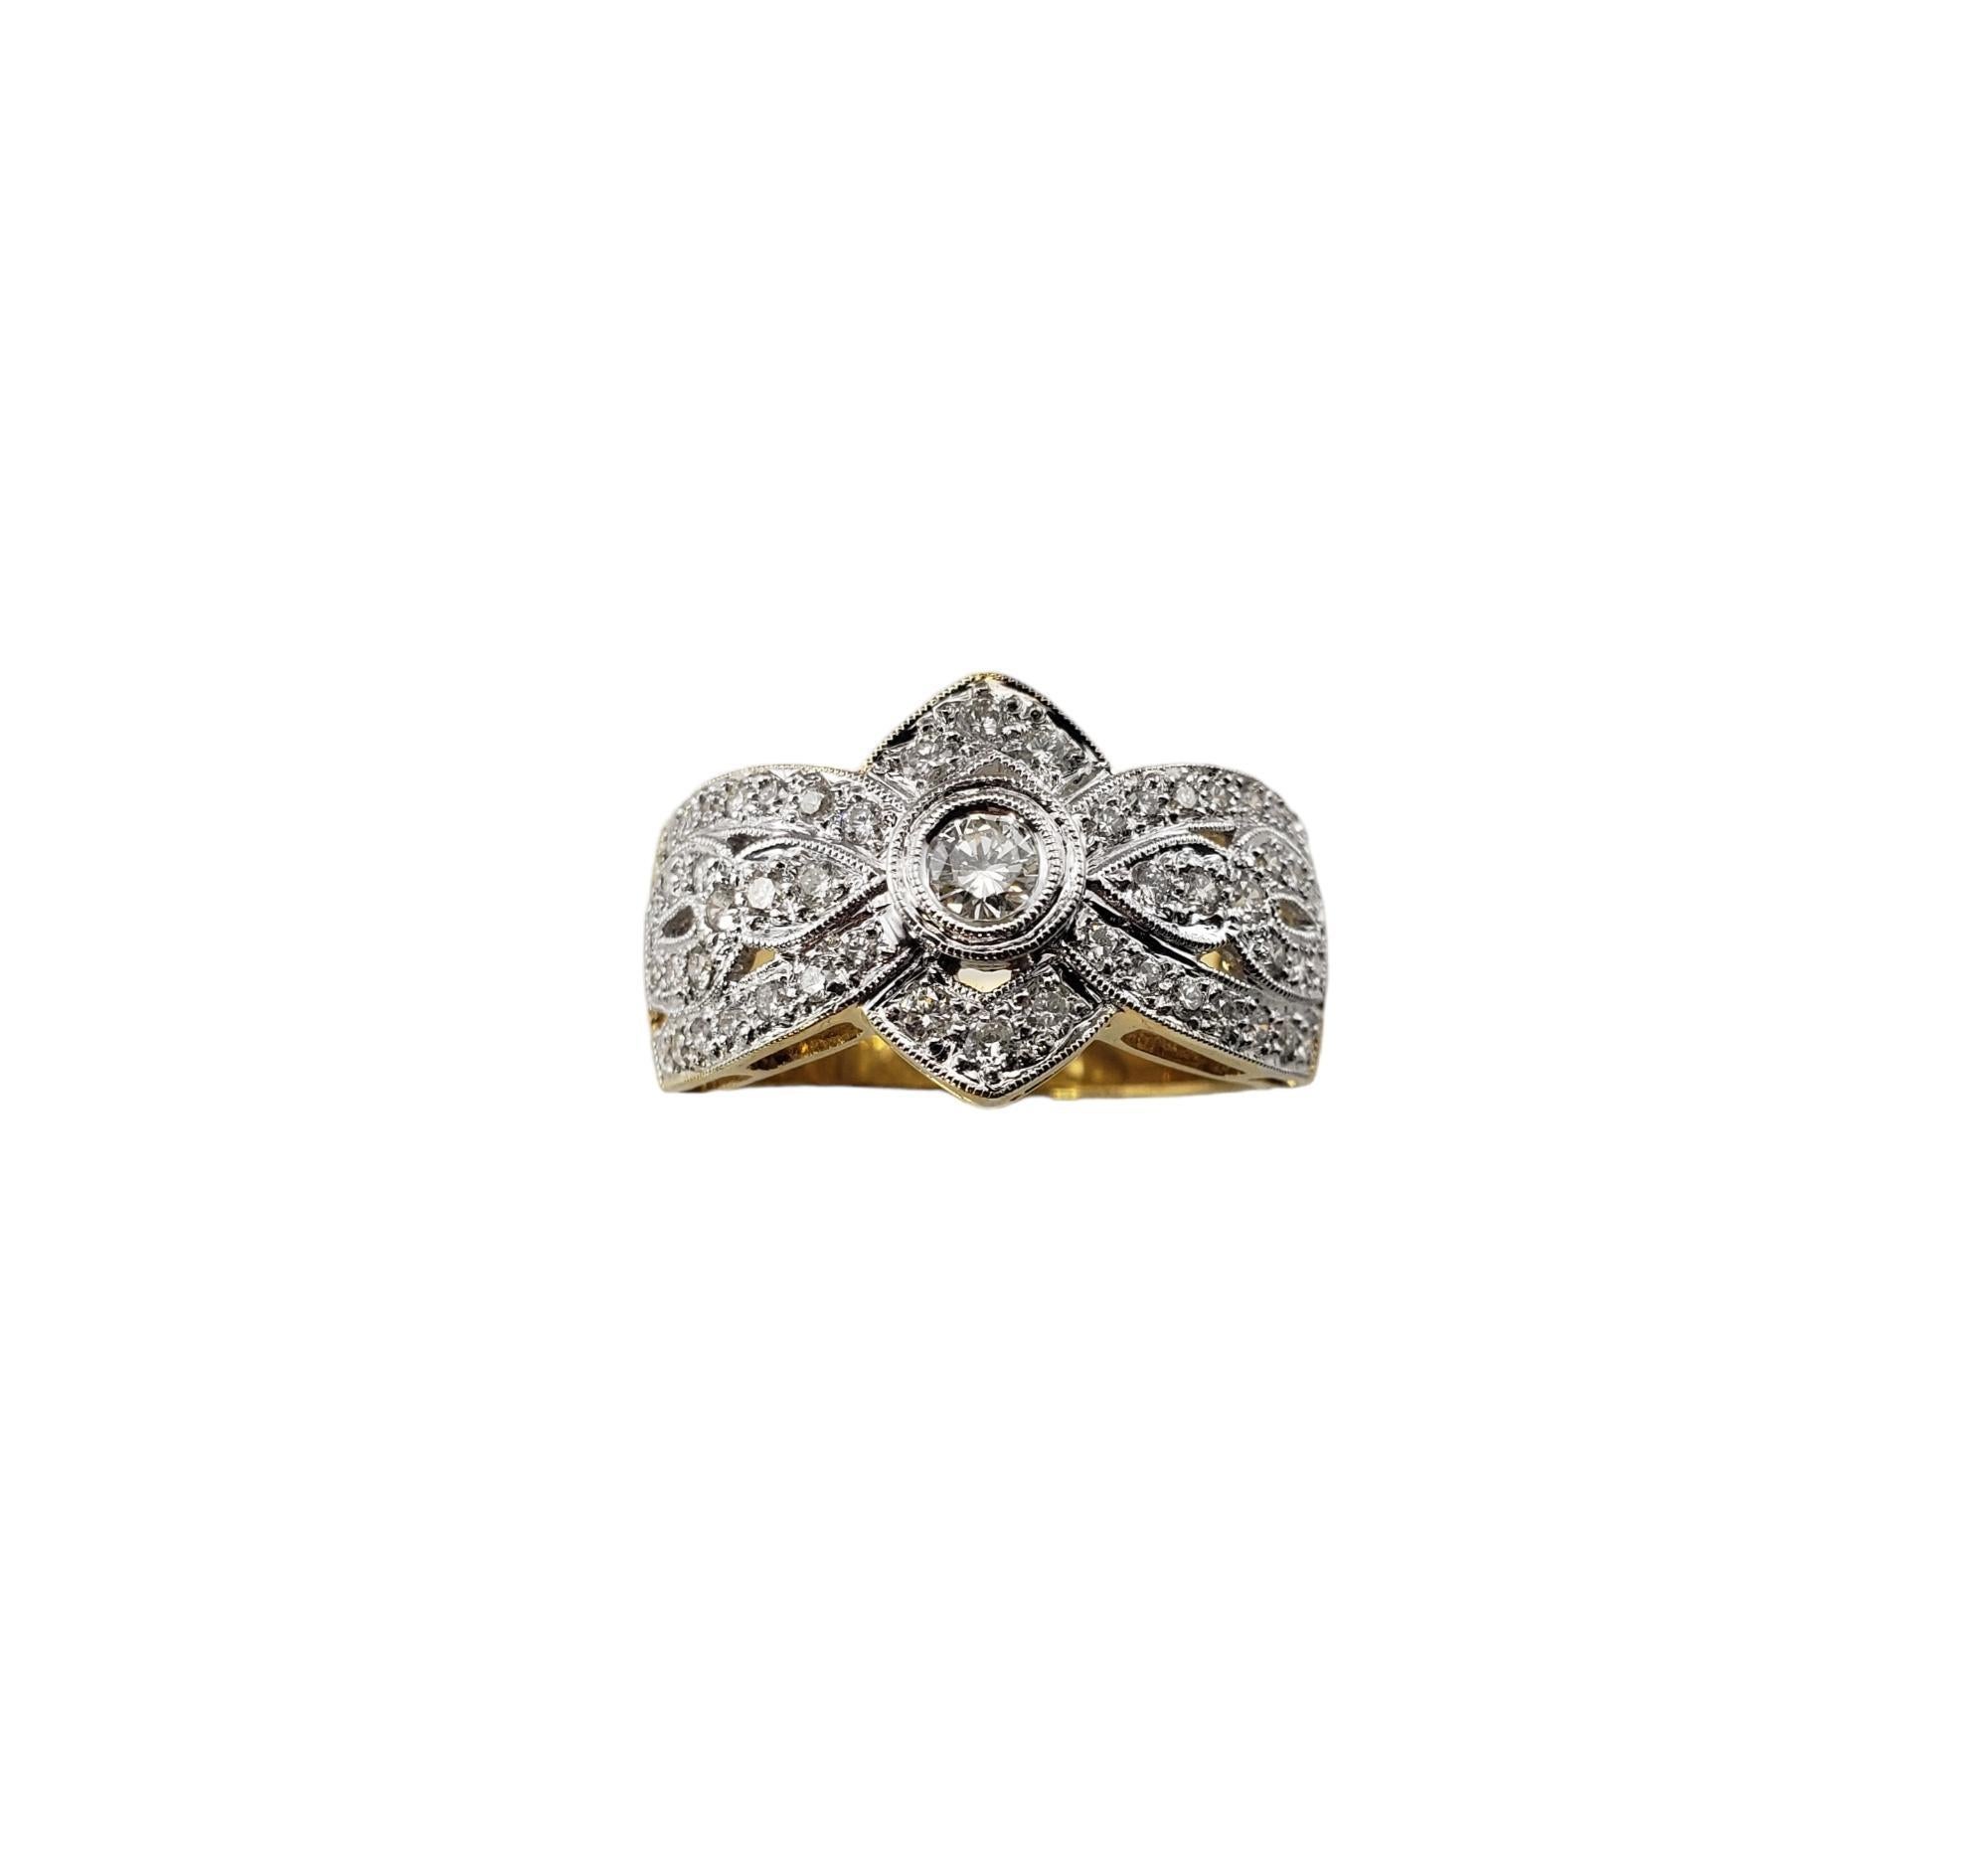 Vintage 18 Karat Yellow Gold and Diamond Ring Size 8 JAGi Certified-

This sparkling ring features 53 round brilliant cut diamonds (center: 0.15 ct.) set in beautifully detailed 18K yellow gold.  Width:  13.1 mm.  Shank: 4.6 mm.

Total diamond